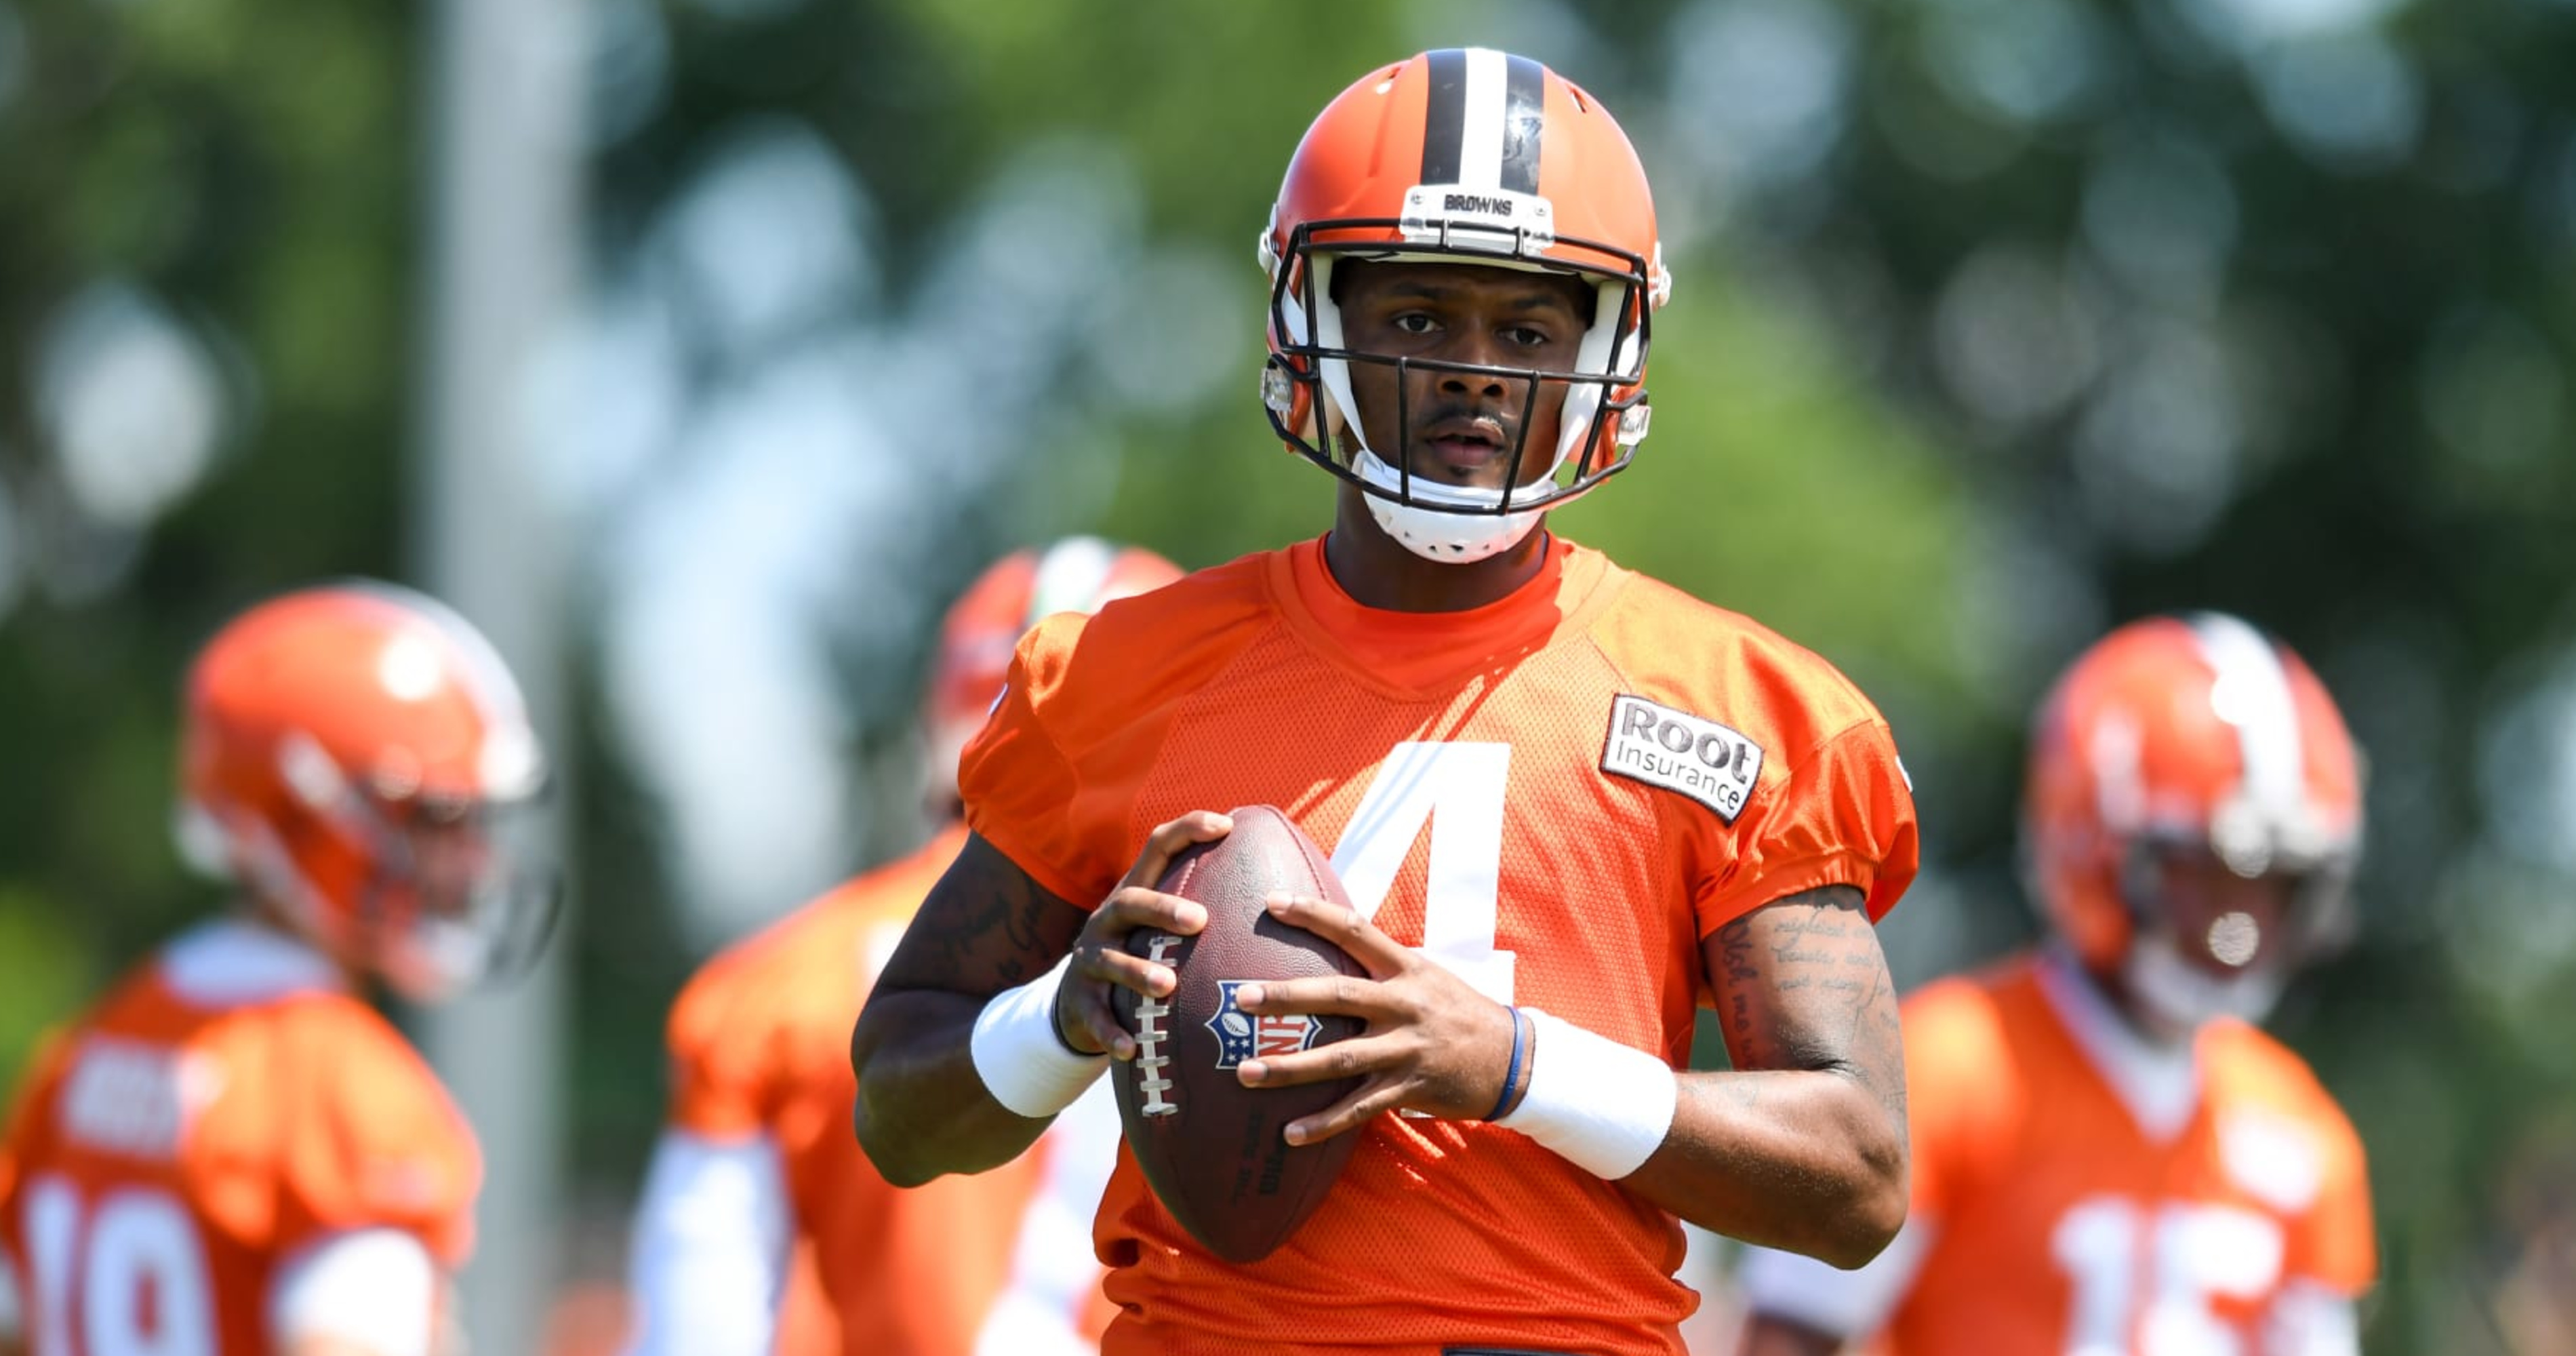 NFL Appeals Decision Browns' Deshaun Watson Should Be Suspended for 6 Games